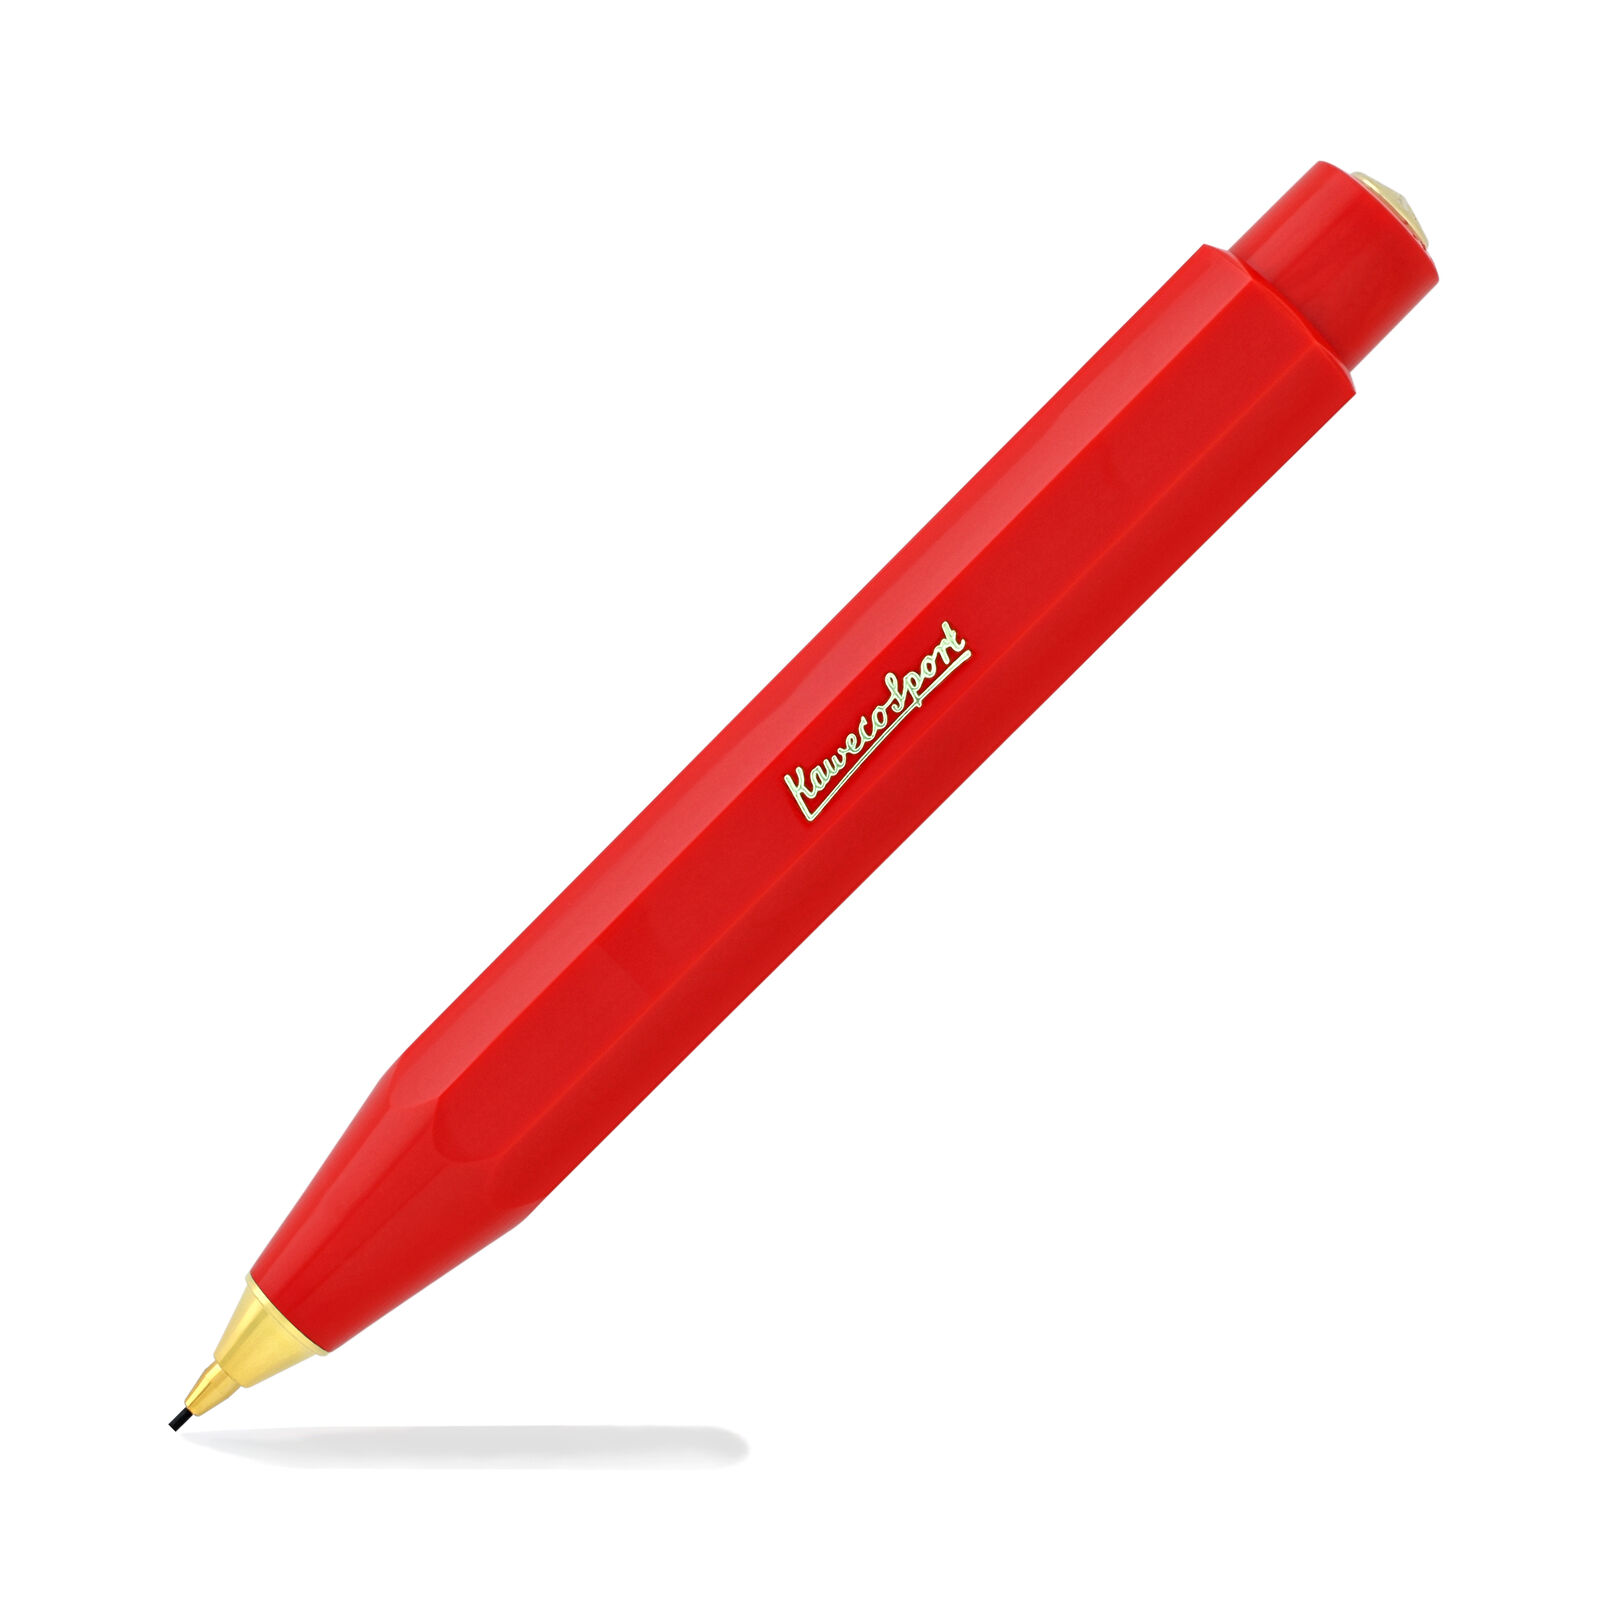 Kaweco Classic Sport Mechanical Pencil in Red - 0.7mm - NEW in Box